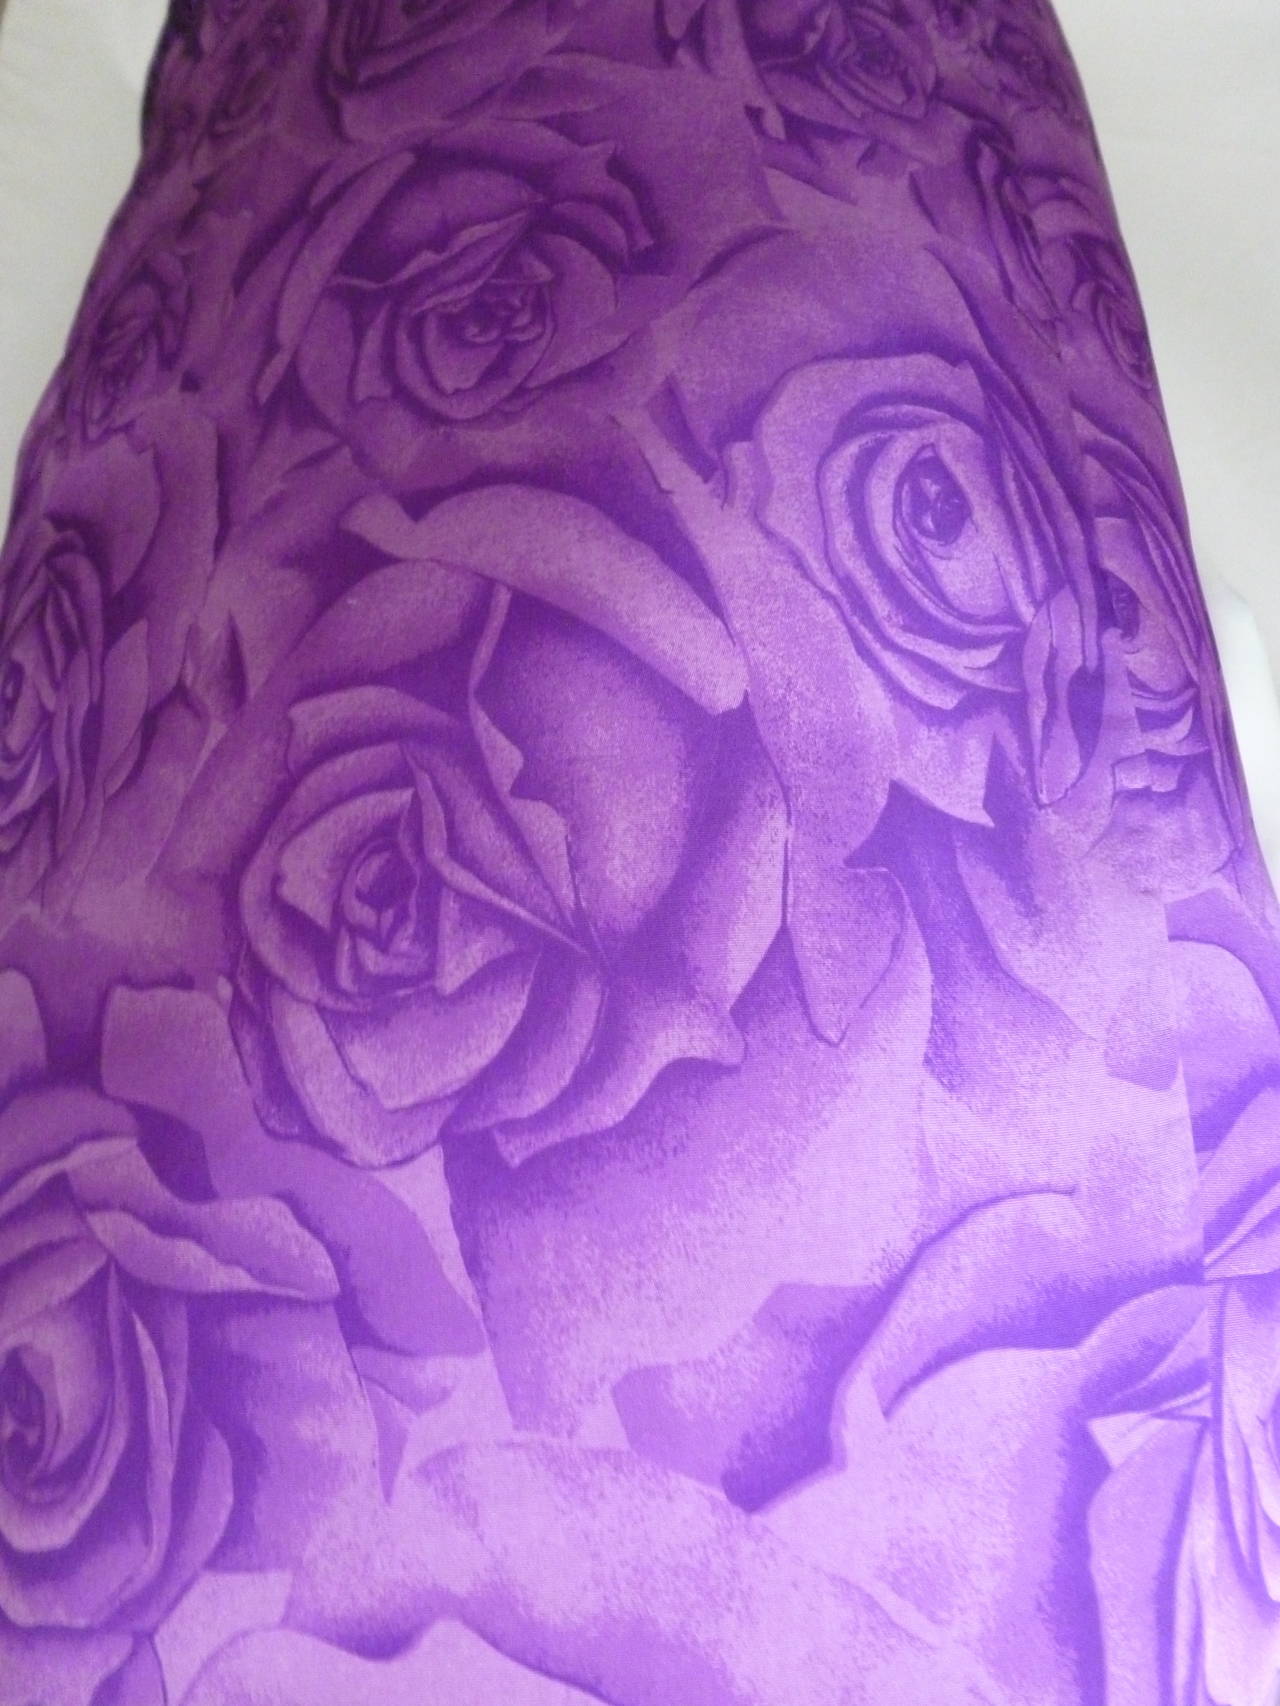 Rare Gianni Versace purple rose printed silk cocktail dress with separate full underskirt from the Spring 1988 collection.

Marked an Italian 40.

Manufacturer - Alias S.p.a.